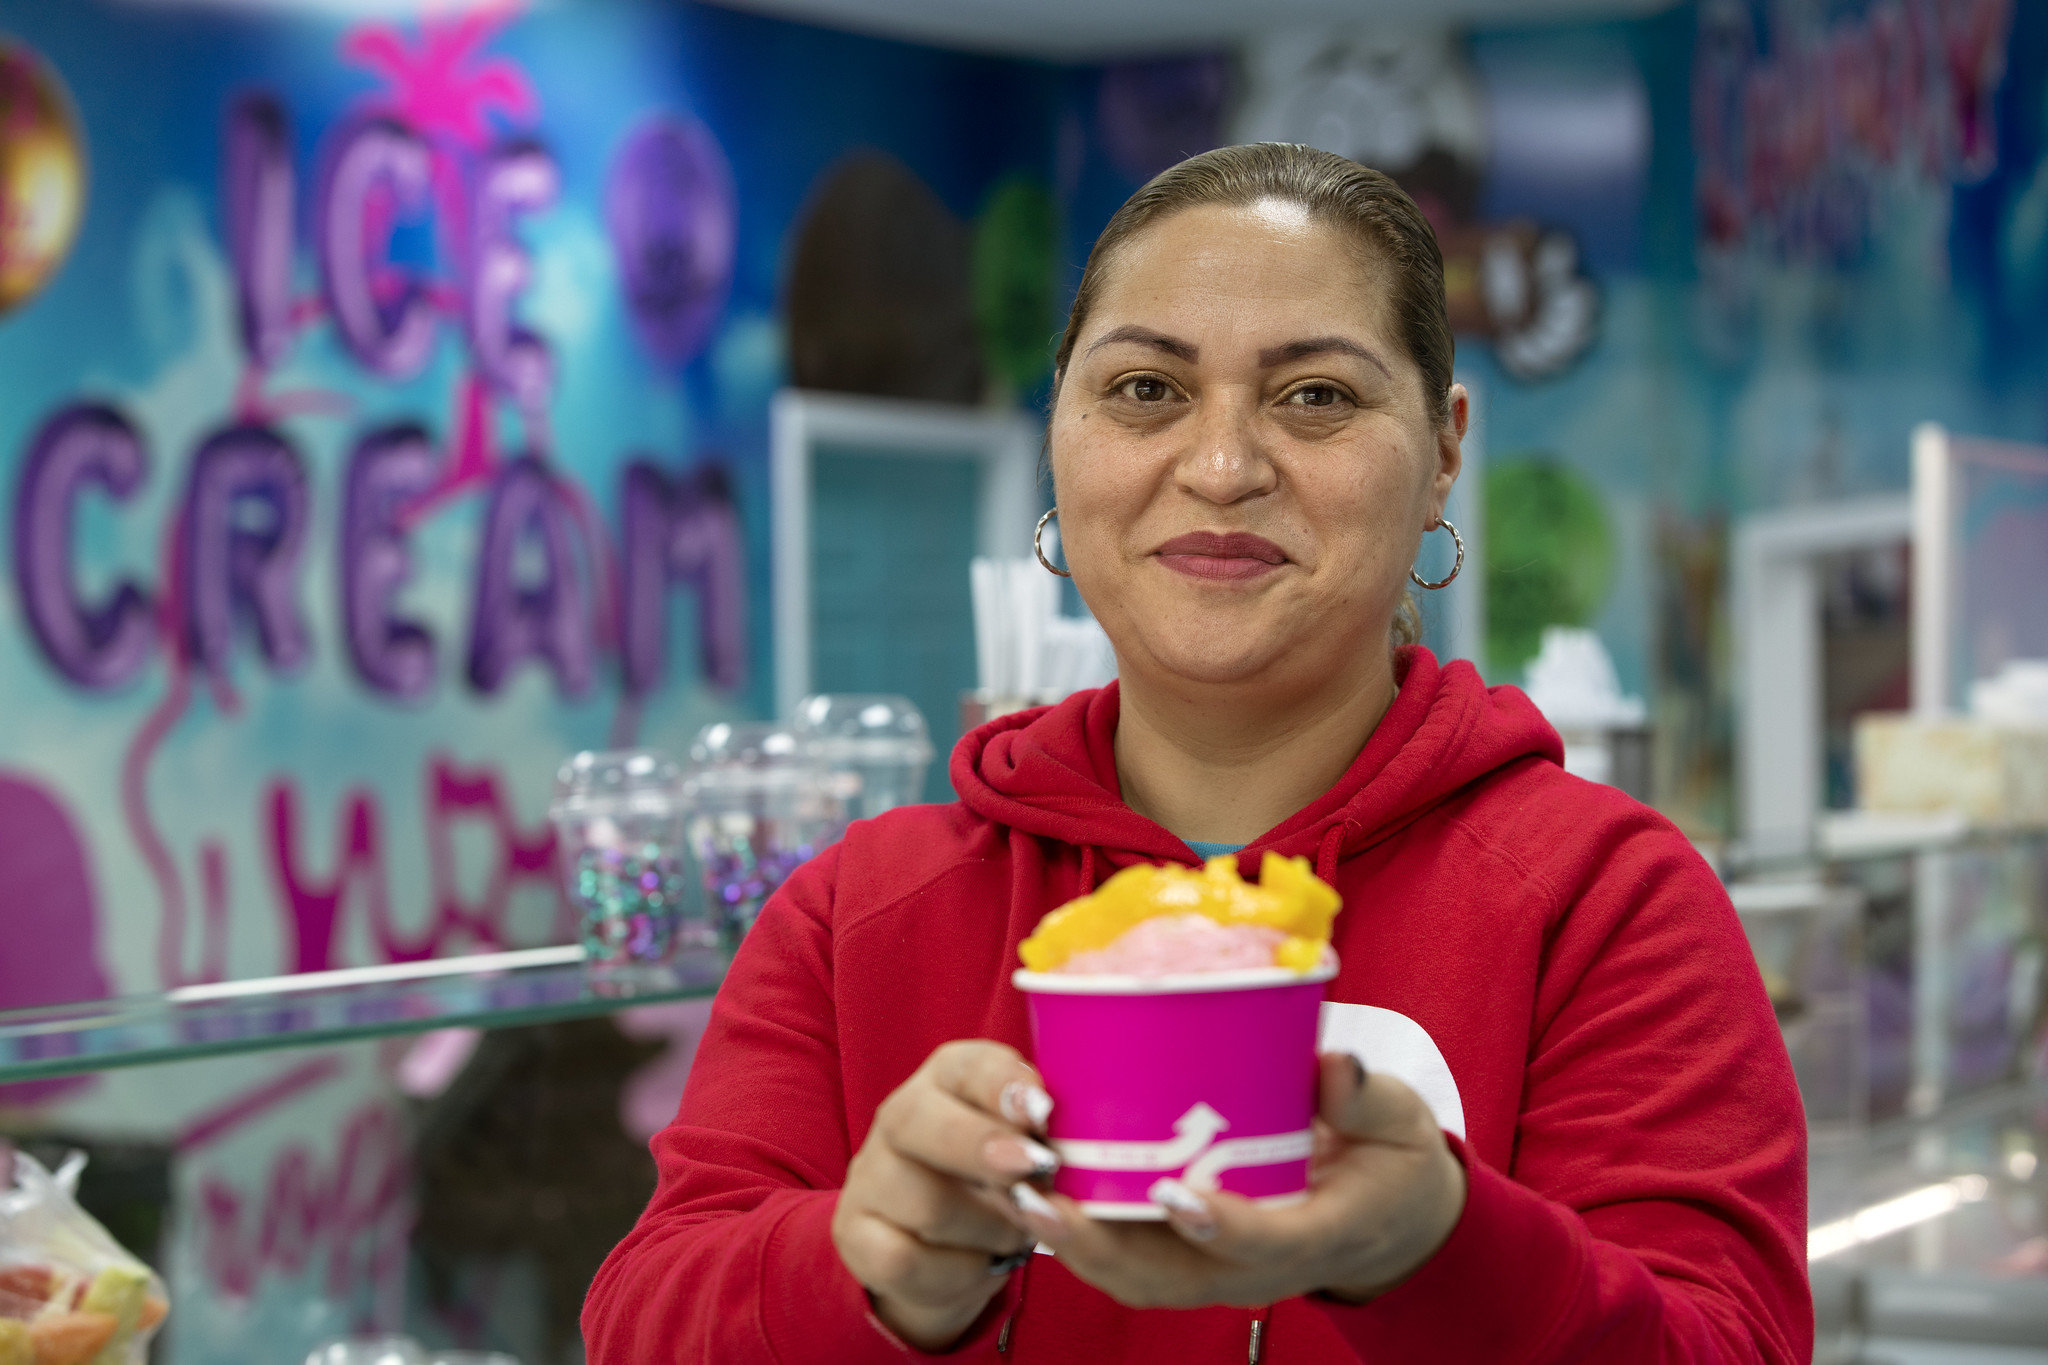 A woman smiles holding a bright pink and yellow ice cream